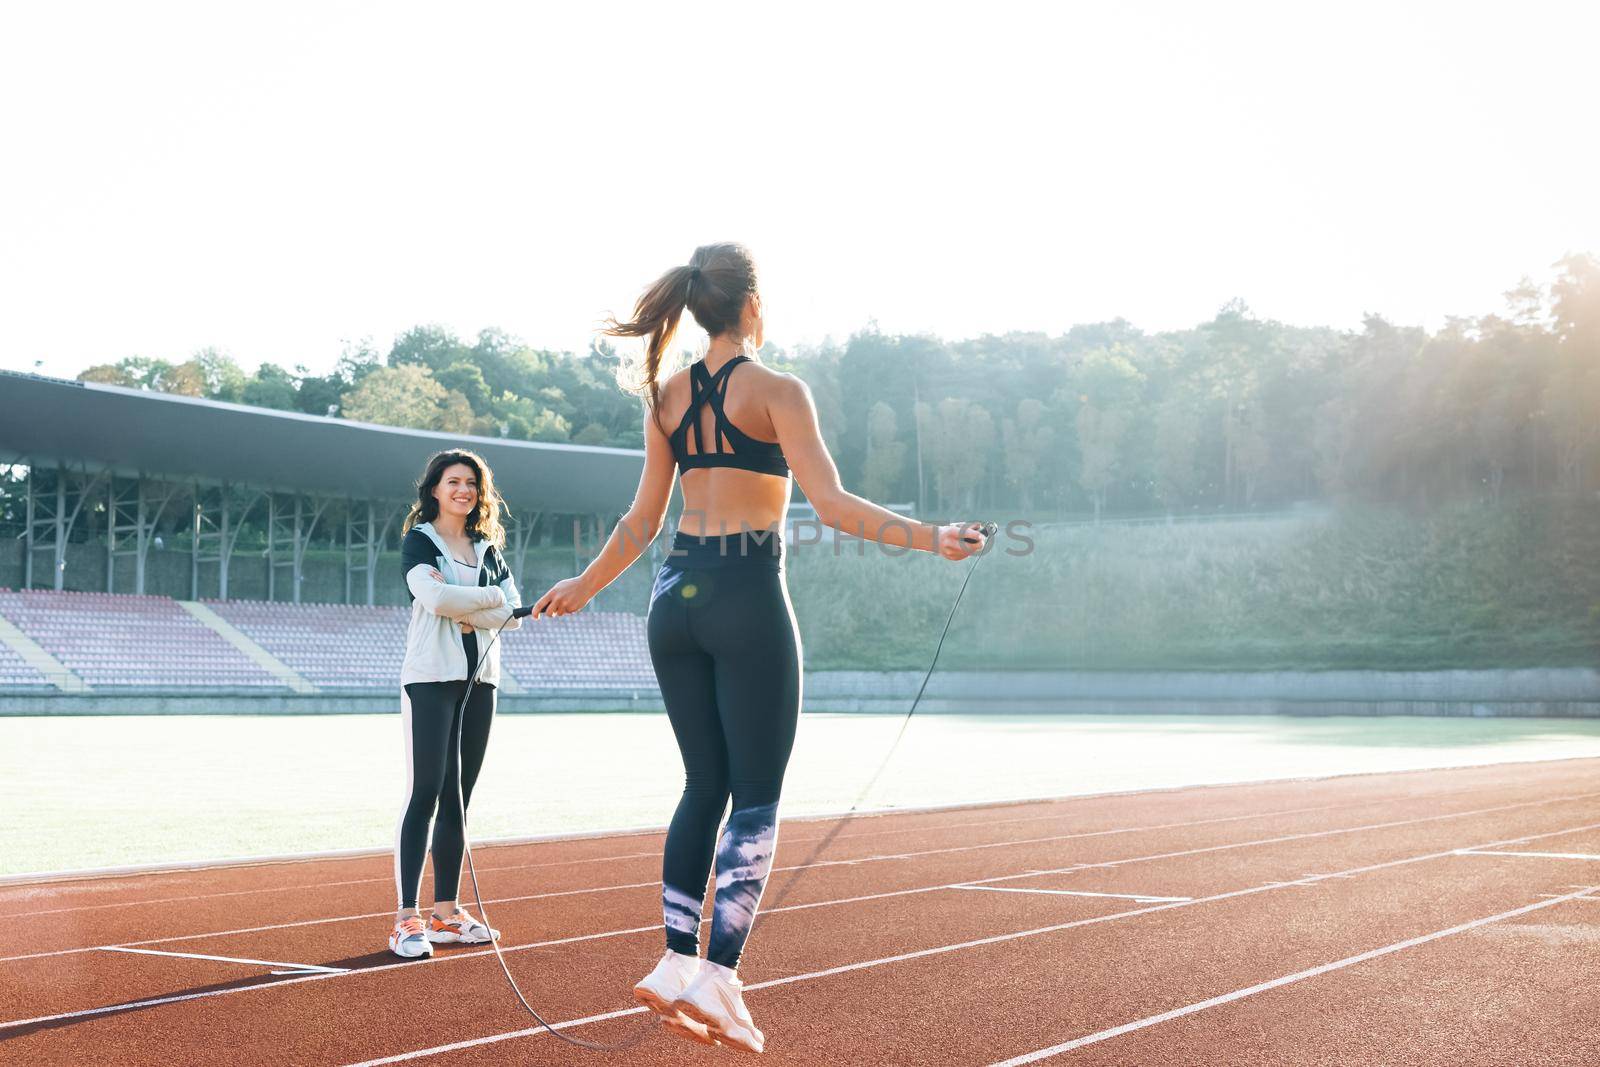 Caucasian woman with personal trainer jumping rope as part of her fitness workout. Sporty female with a good figure jumps rope on sports track of stadium. Exercising strength cardio and power.